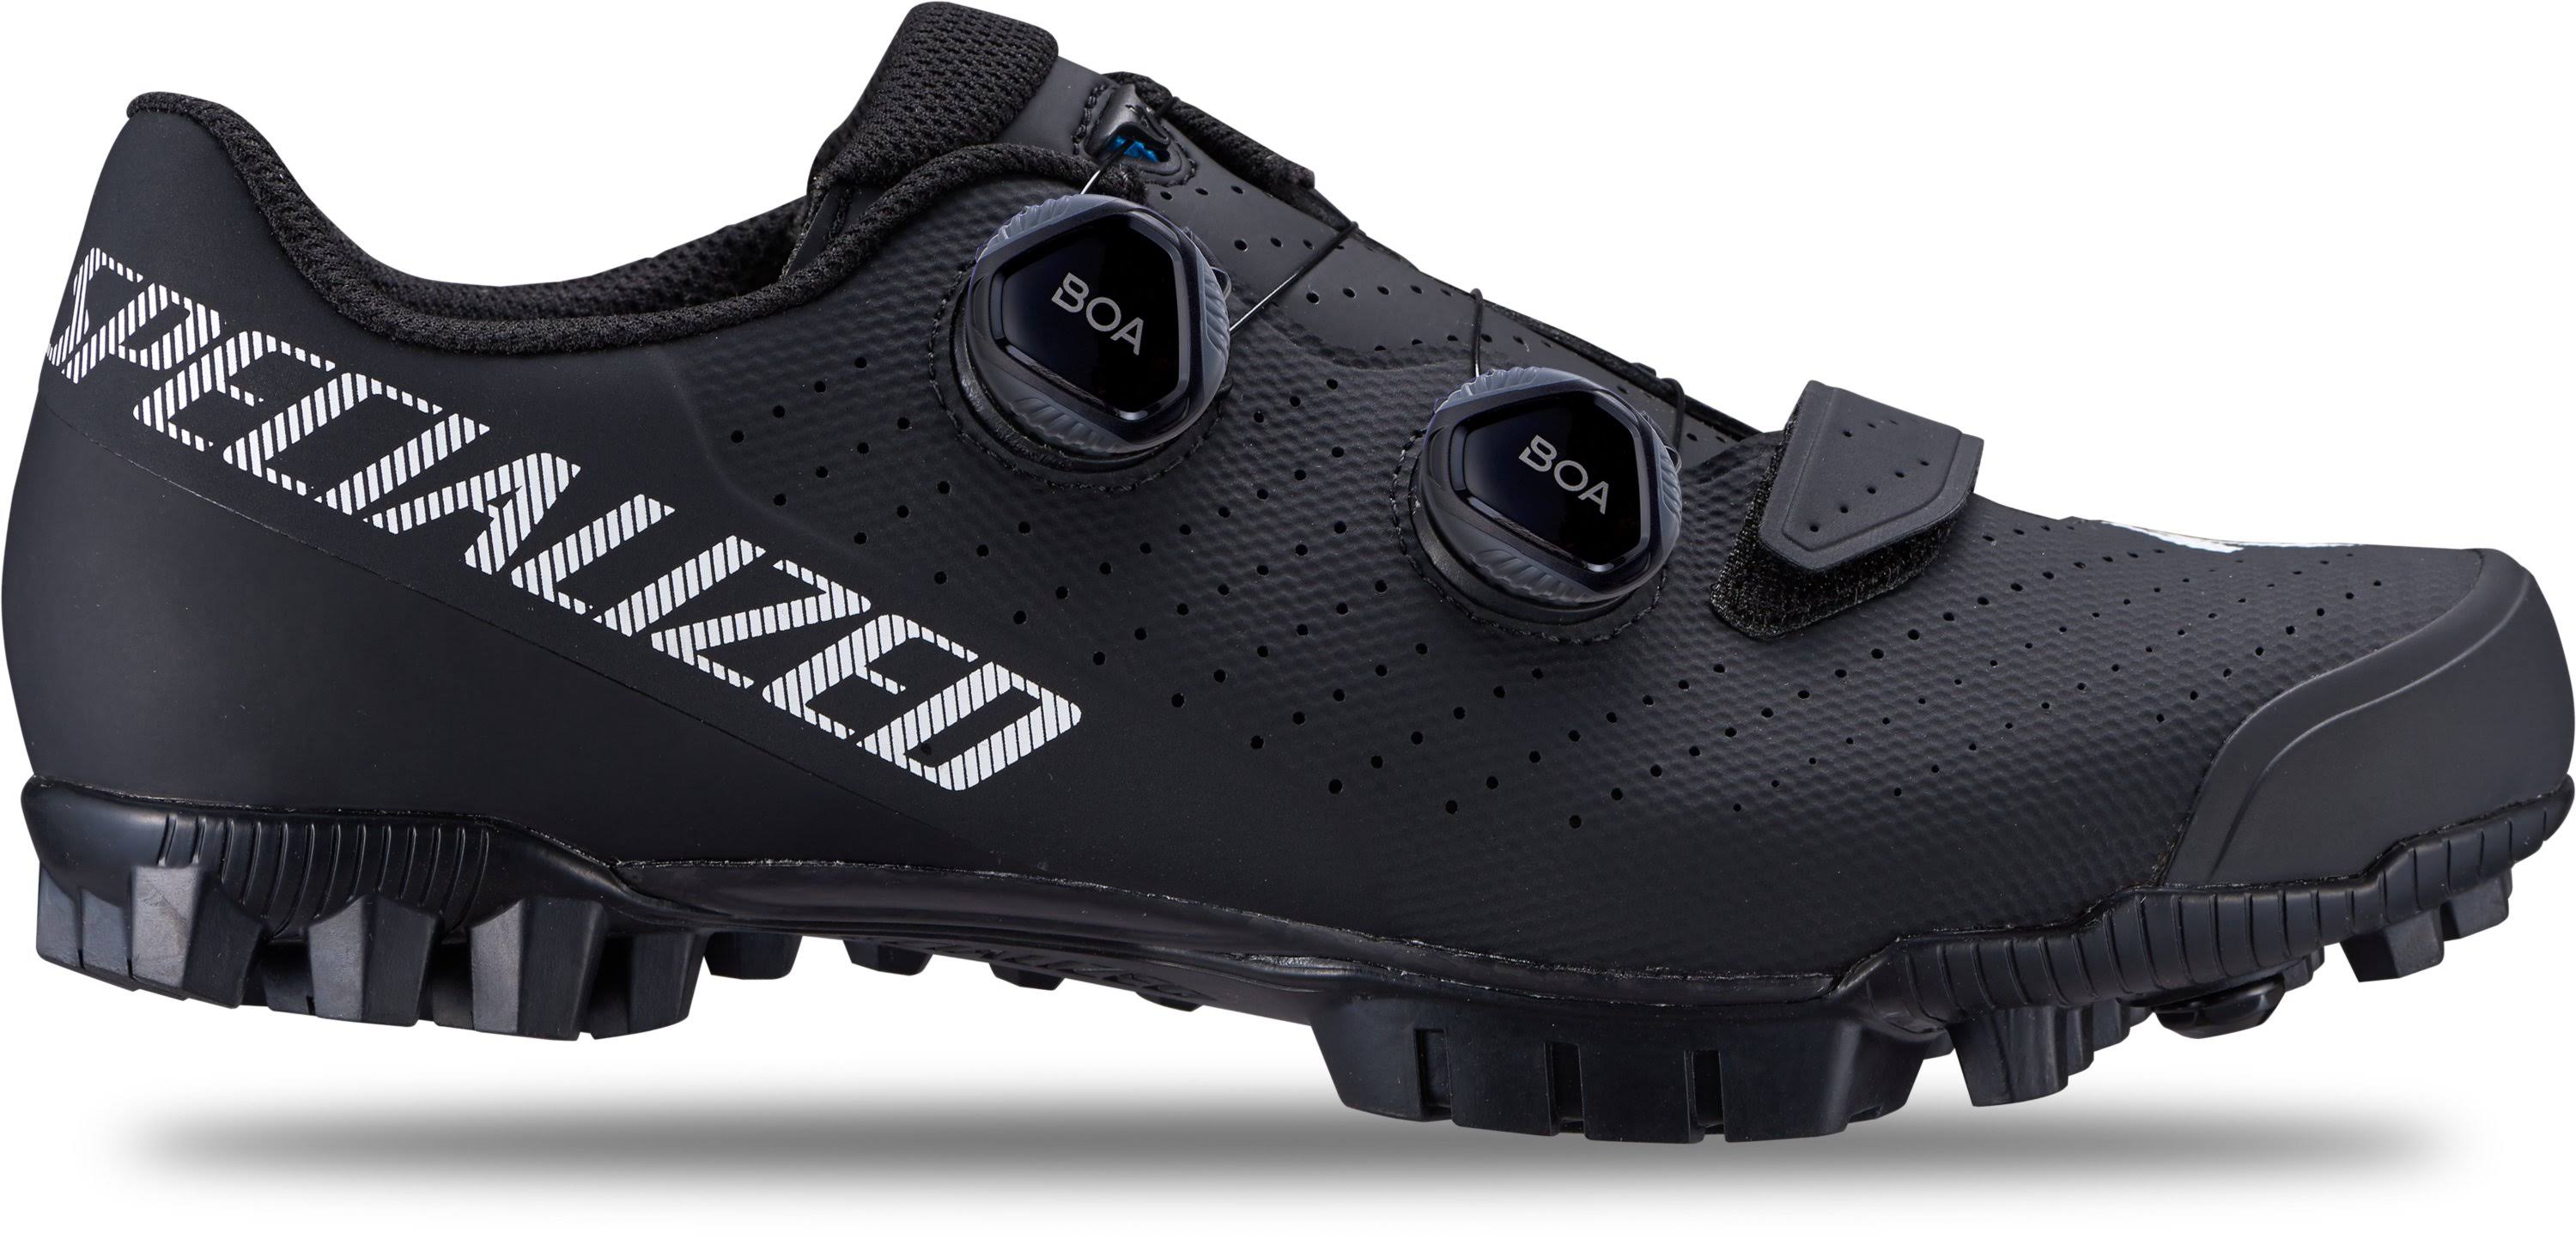 Specialized Recon 2.0 Mountain Bike Shoes - Black